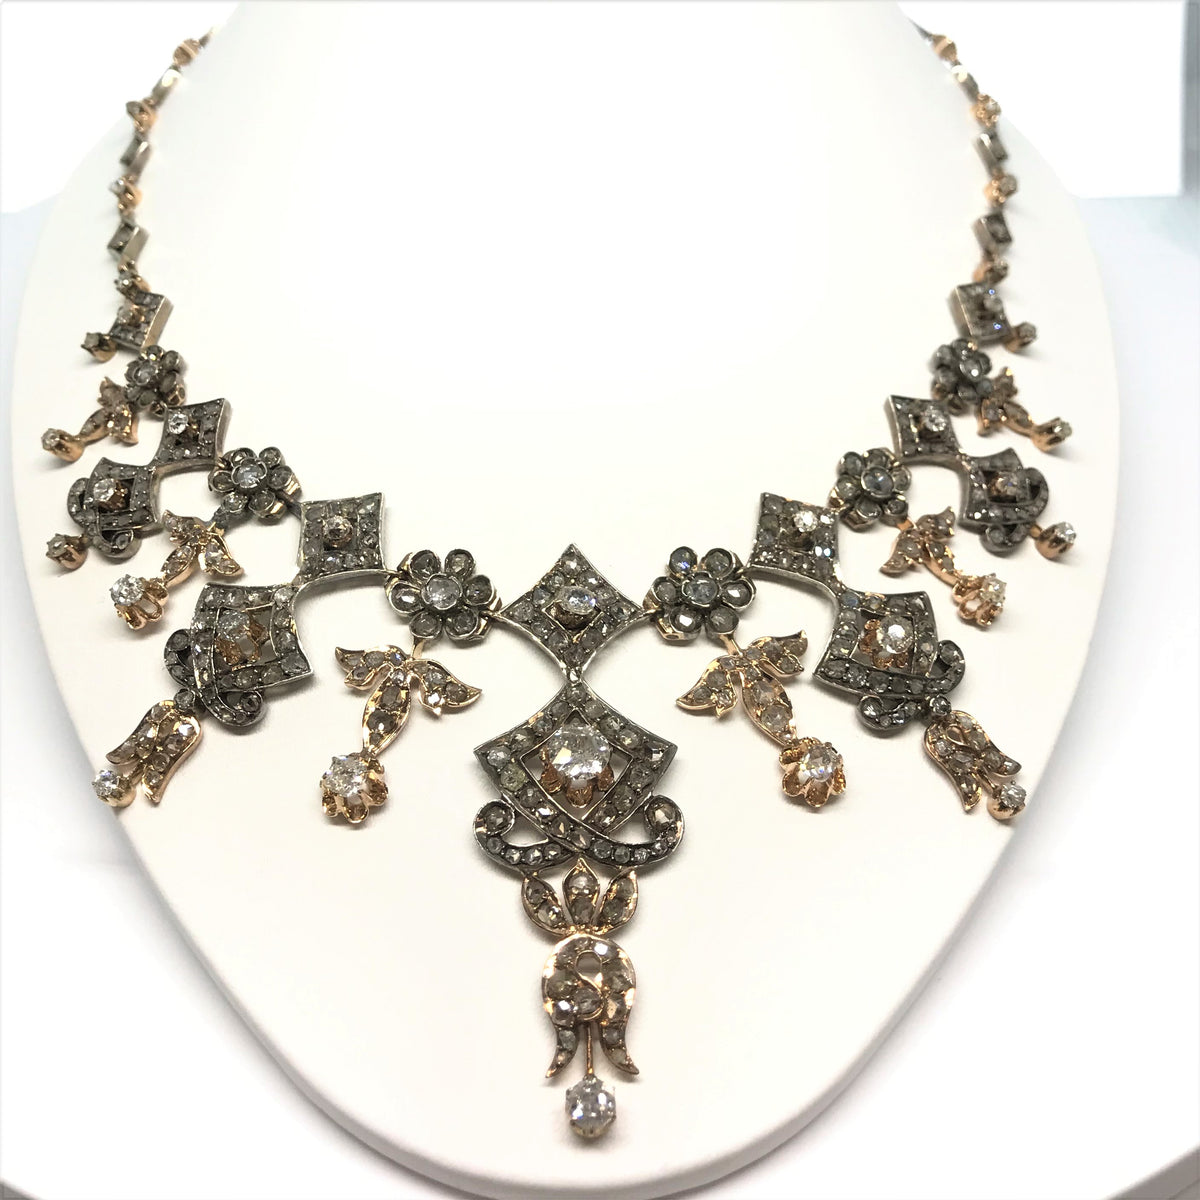 Ladies Antique 10k Gold and Silver Diamond Necklace